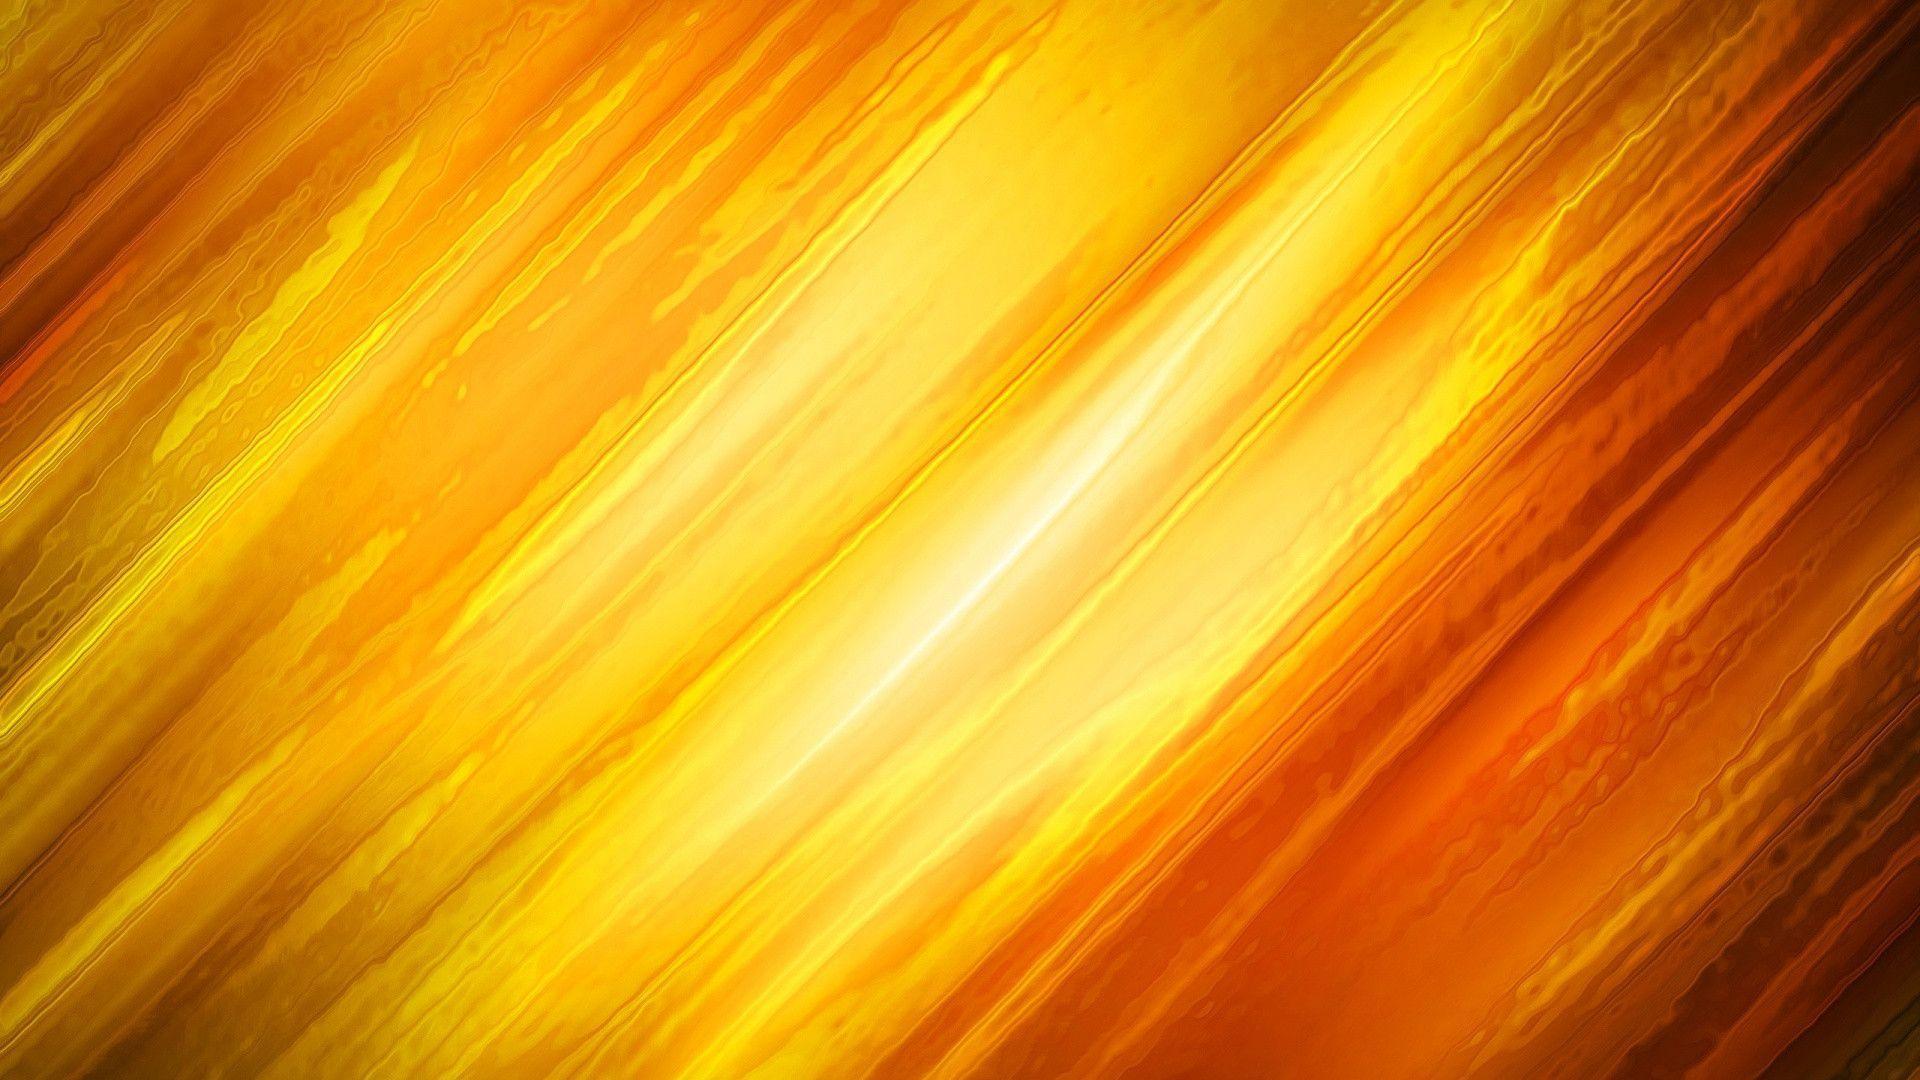 White And Yellow Abstract Wallpaper HD Cool 7 HD Wallpaper. isghd